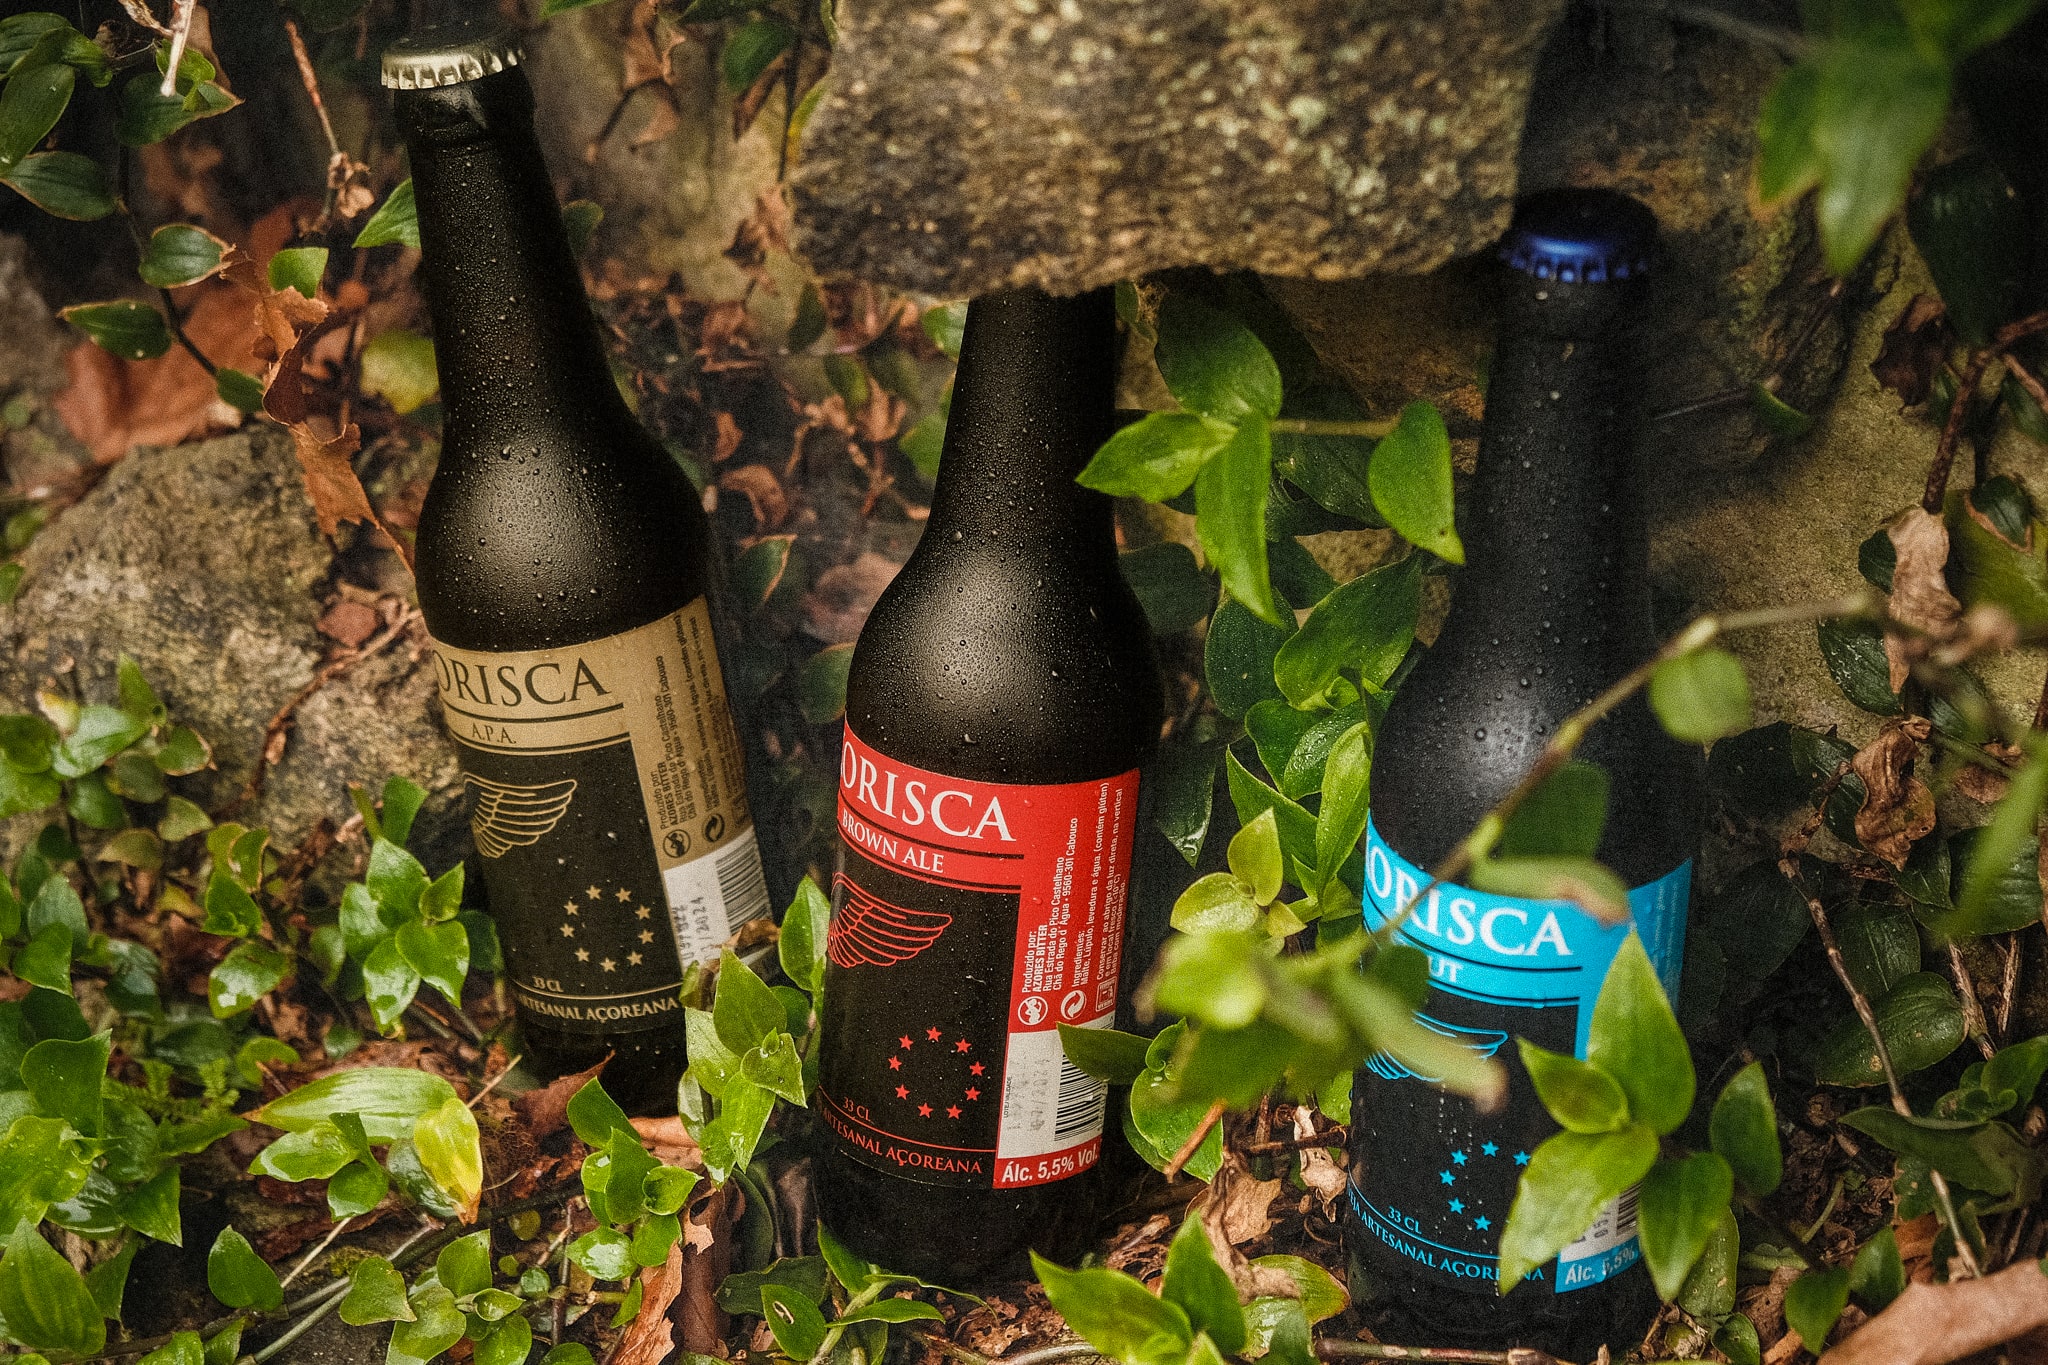 Azorean craft beer Korisca Clássica II (APA), Korisca Clássica I (Brown Ale) and Korisca Clássica III (Stout) on the ground with green vegetation and brown leaves, São Miguel, Azores.